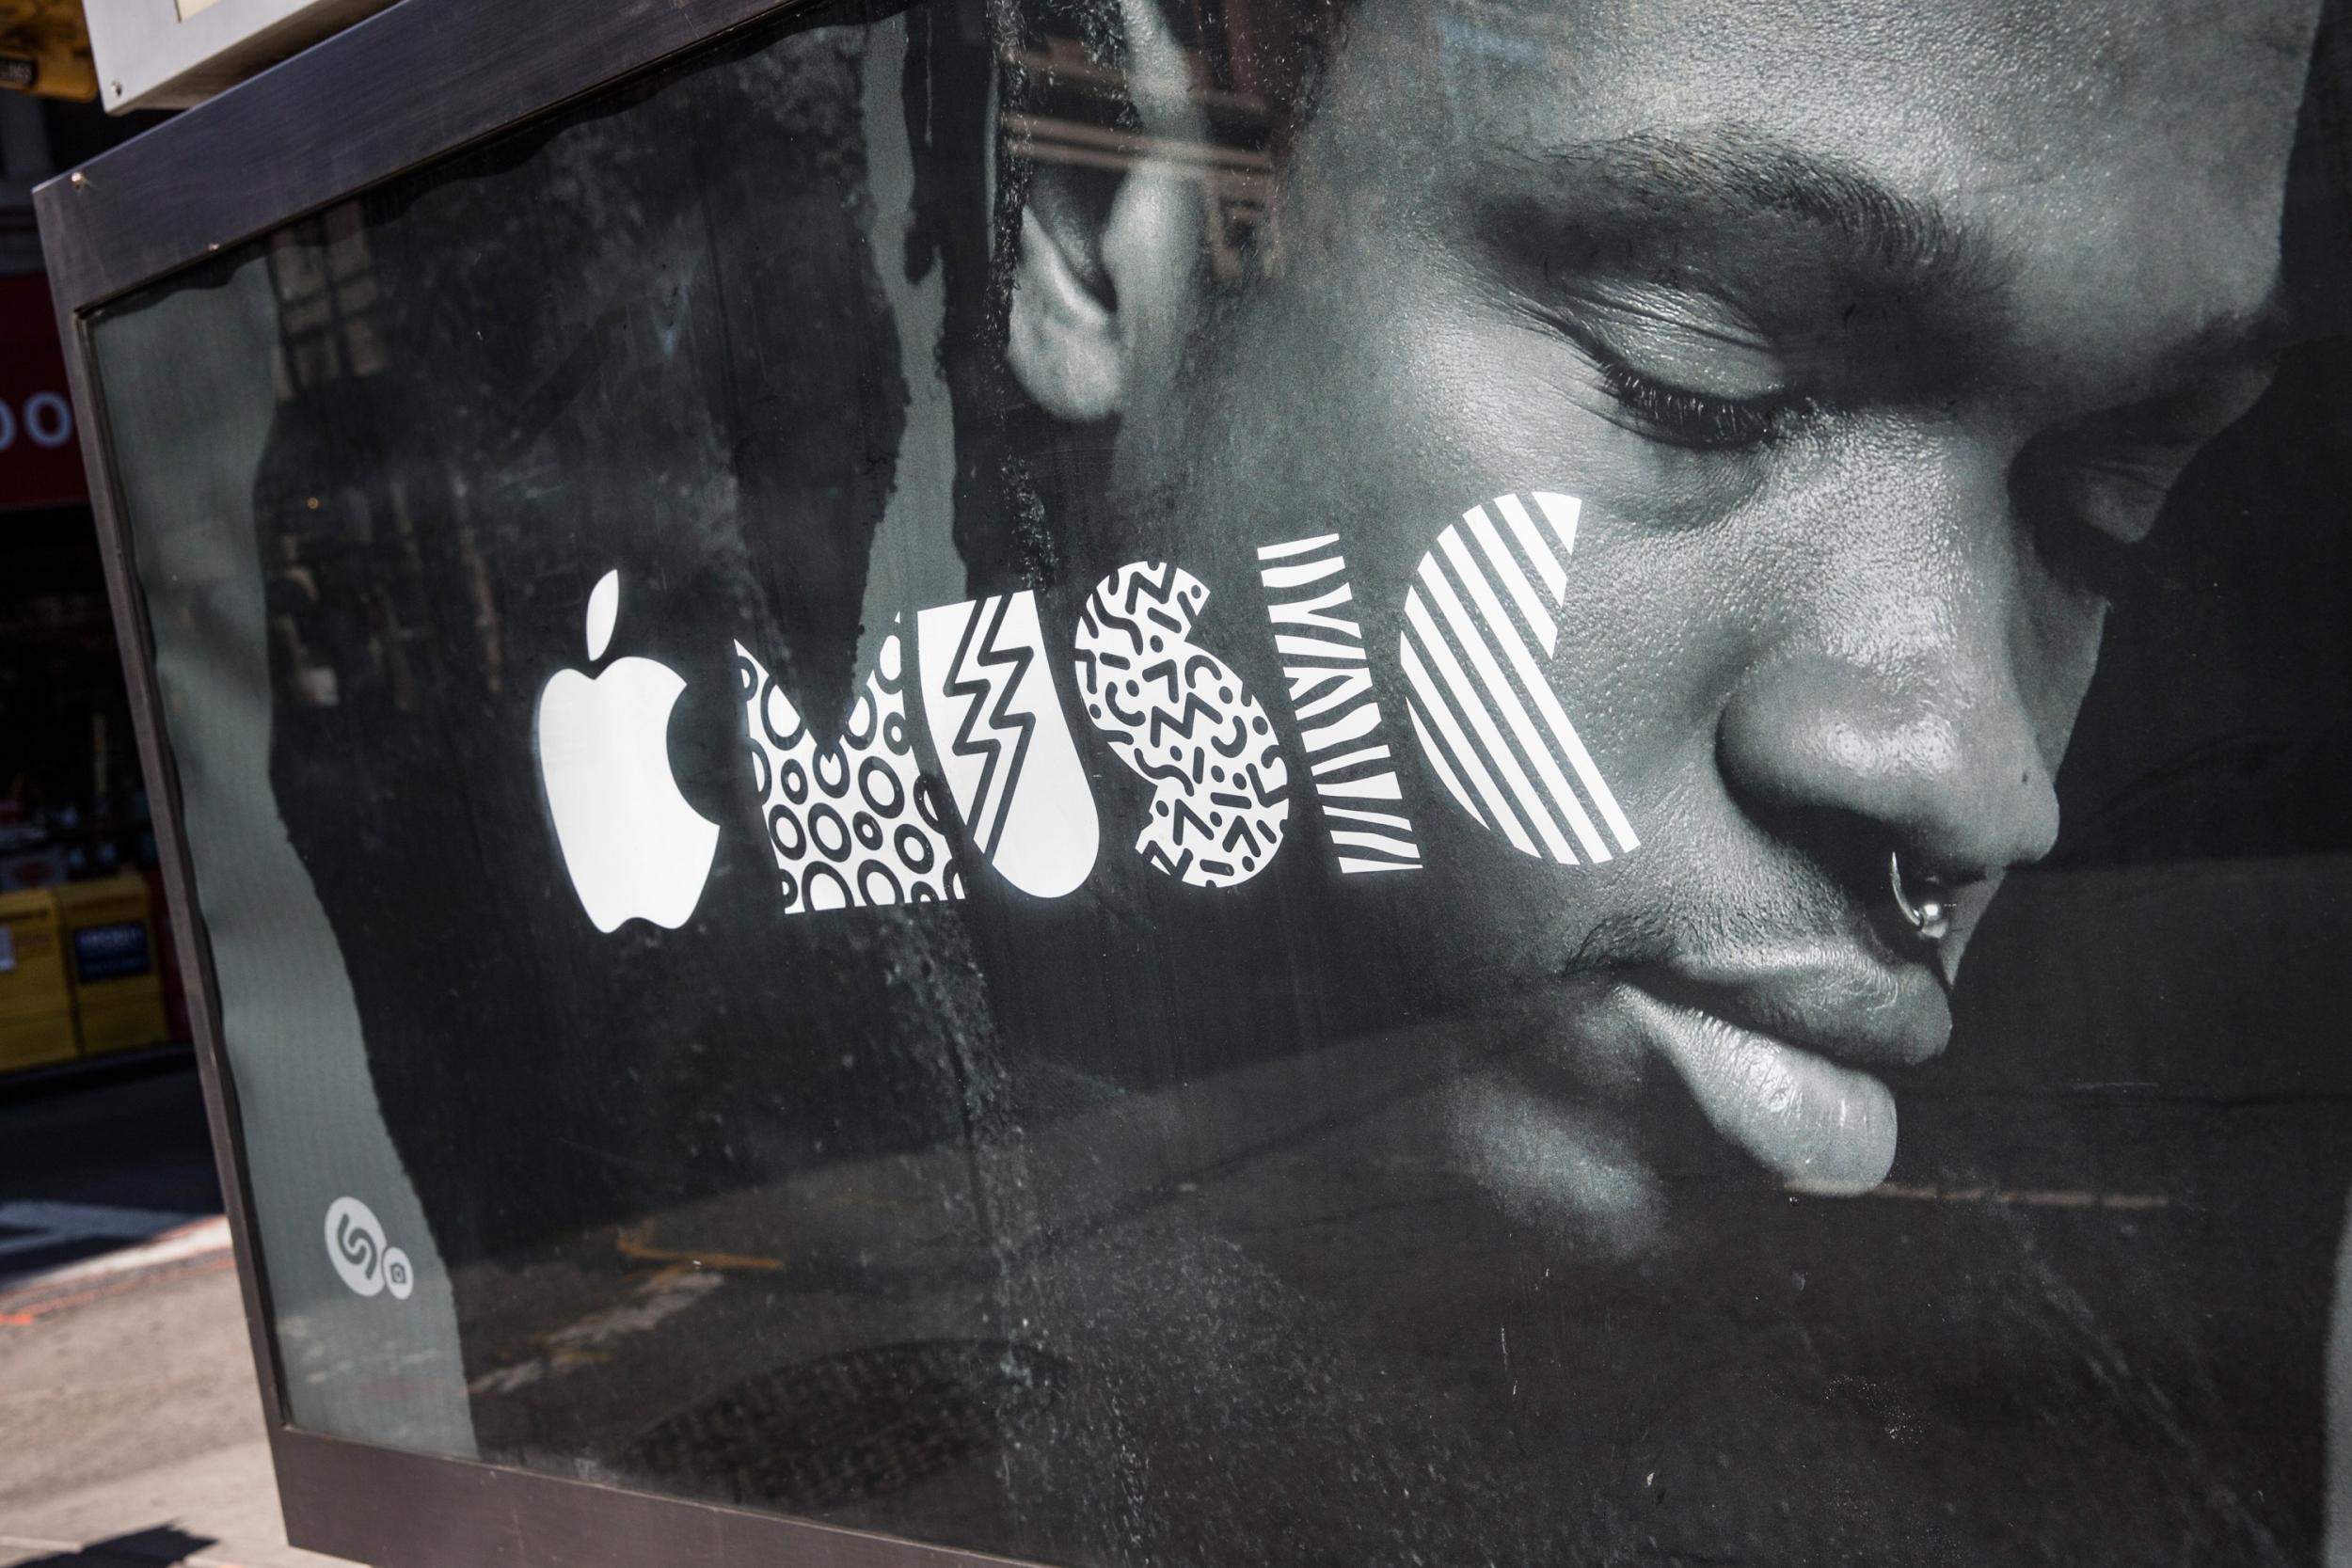 6.5 million people worldwide are now paying for Apple Music